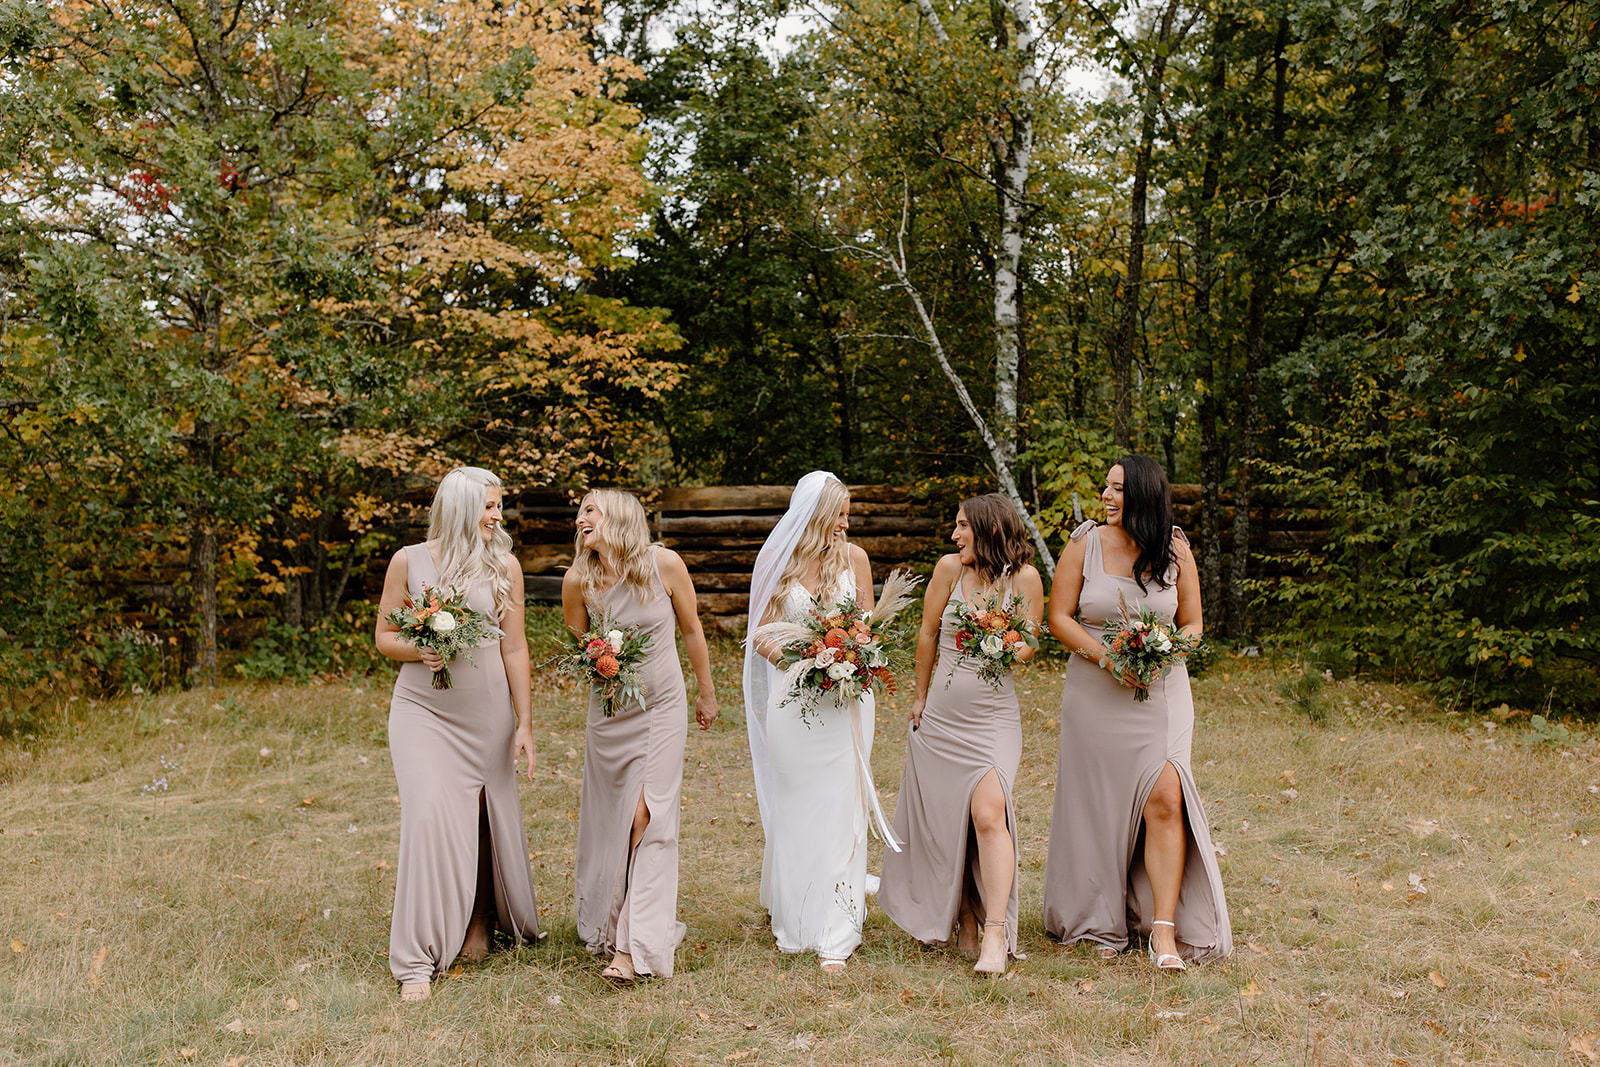 Bride and groom with their wedding party in front of trees with leaves changing color